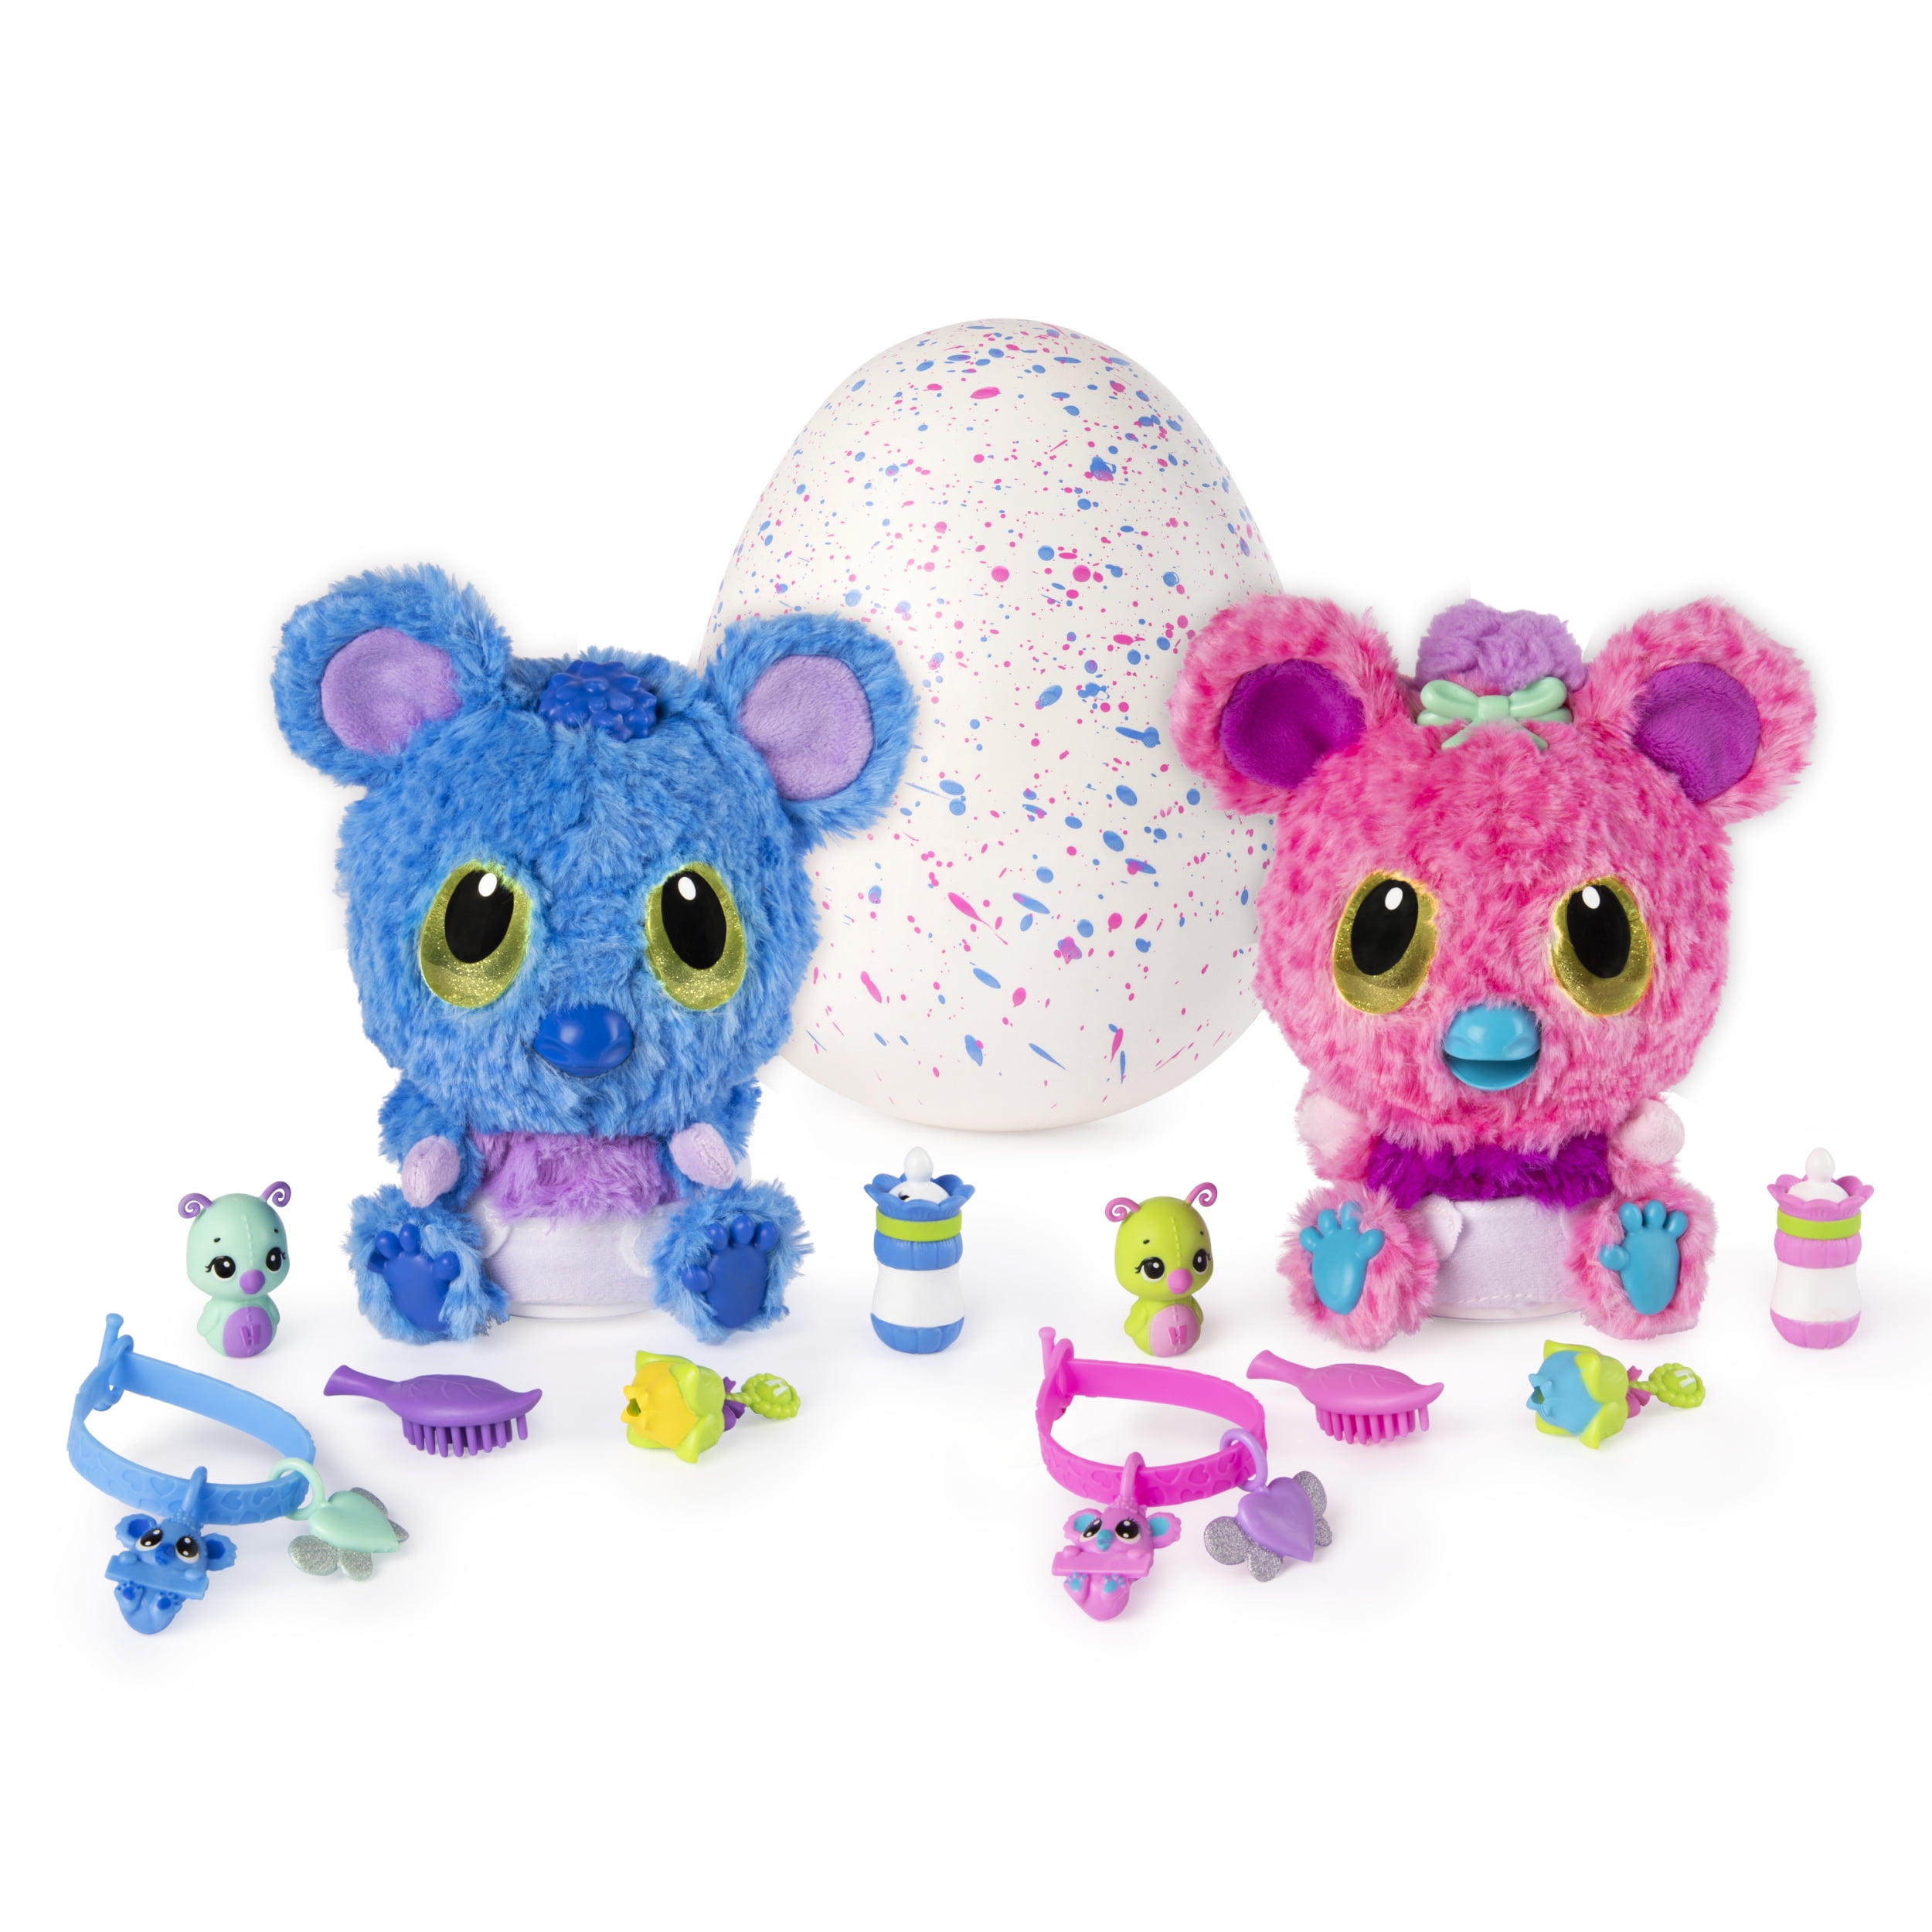 hatchimals what age are they for